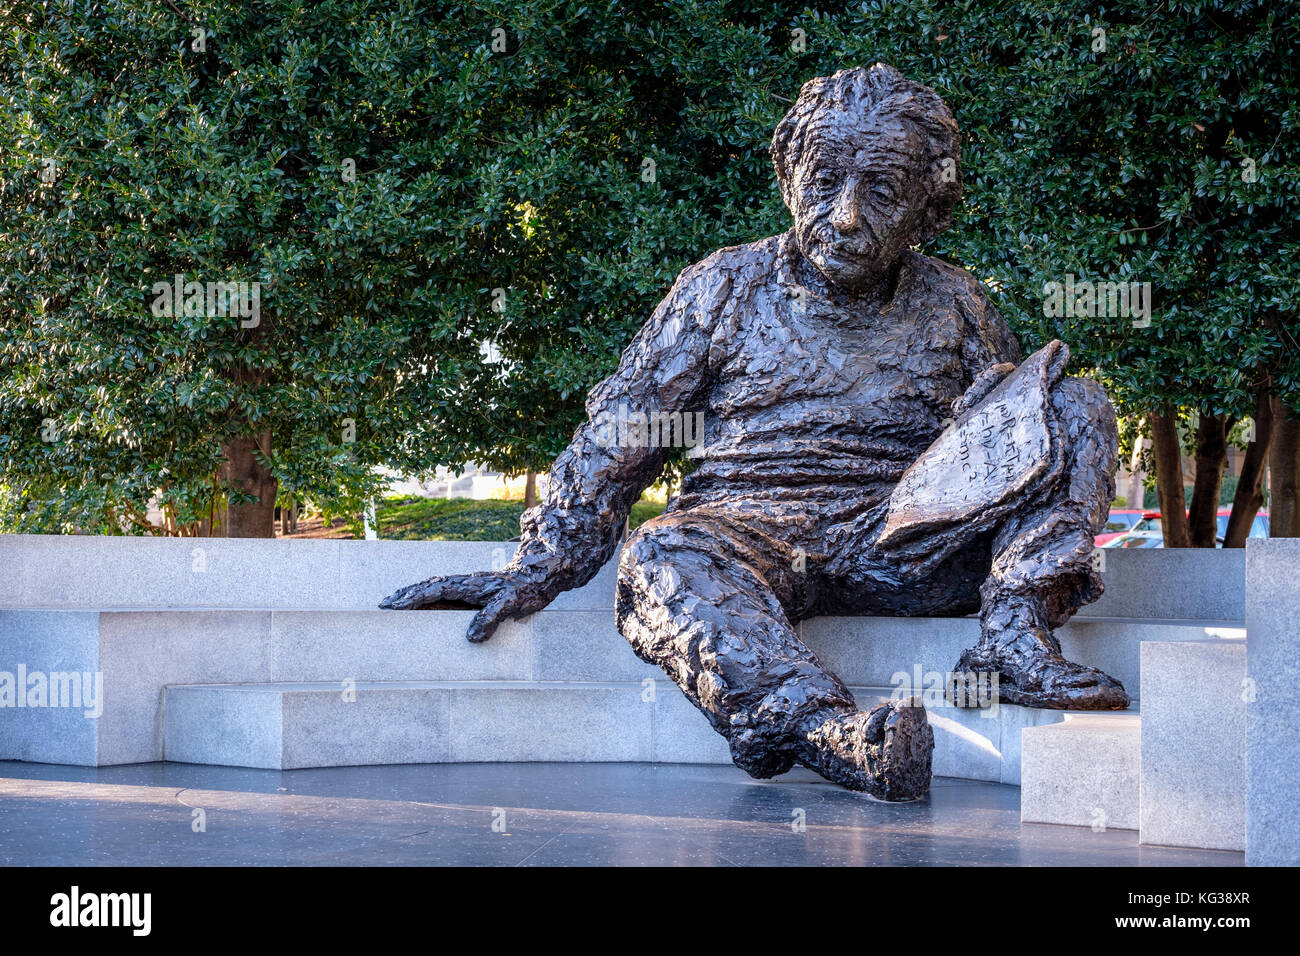 Albert Einstein Memorial statue, sculpture at the National Academy of Sciences, Washington, DC, United States of America, USA. Stock Photo